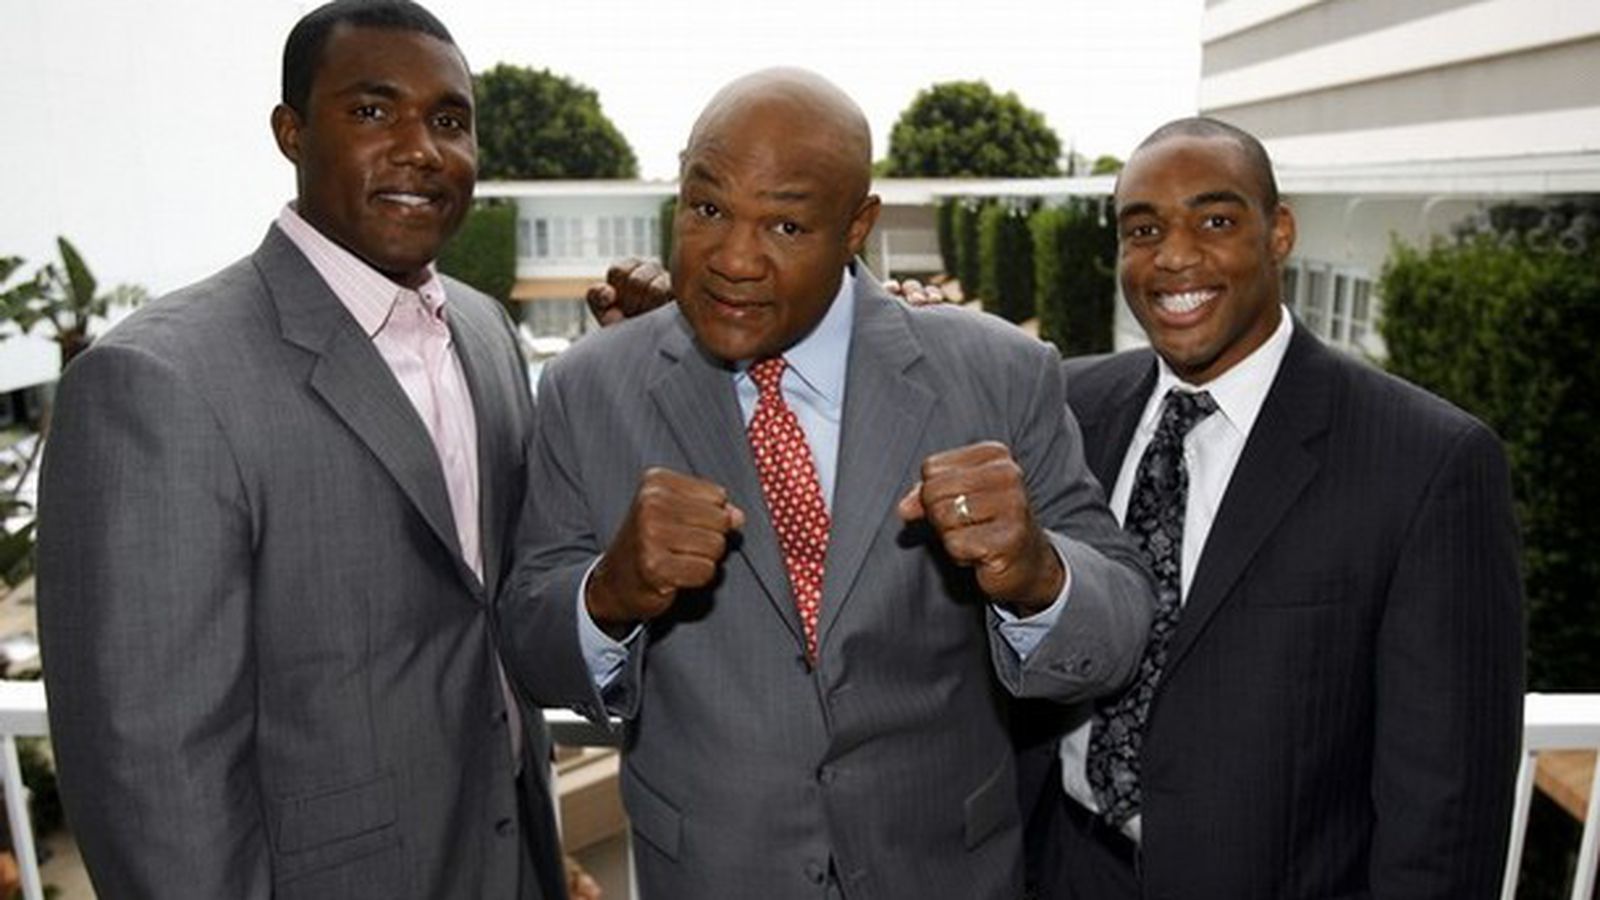 Image of George Foreman holding a Choice Home Warranty logo, smiling.